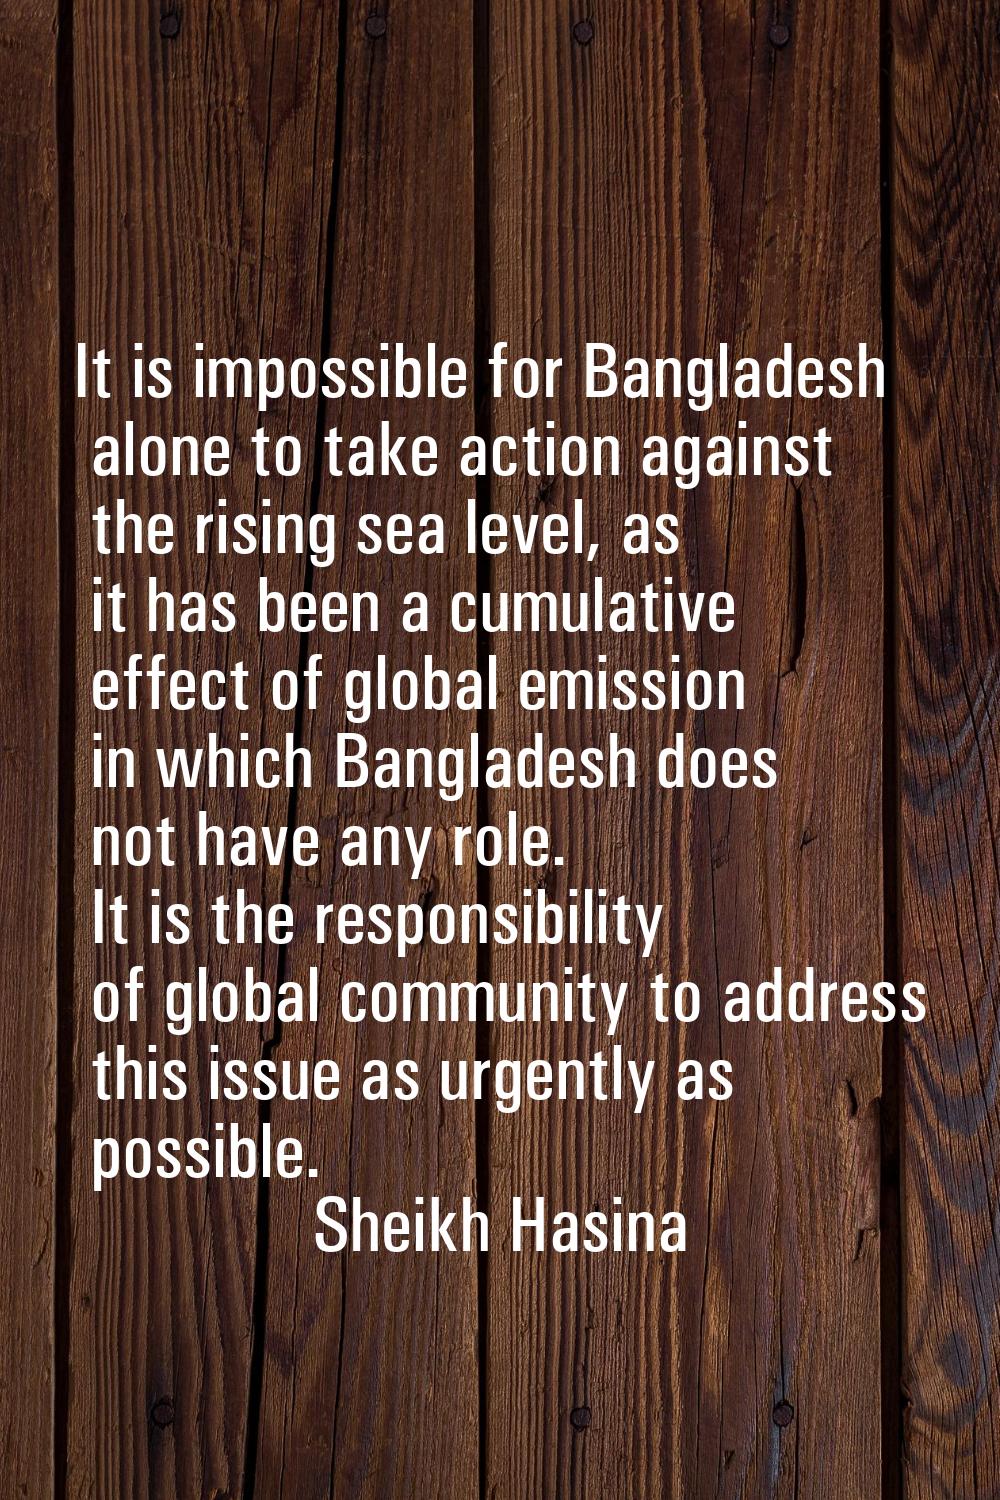 It is impossible for Bangladesh alone to take action against the rising sea level, as it has been a